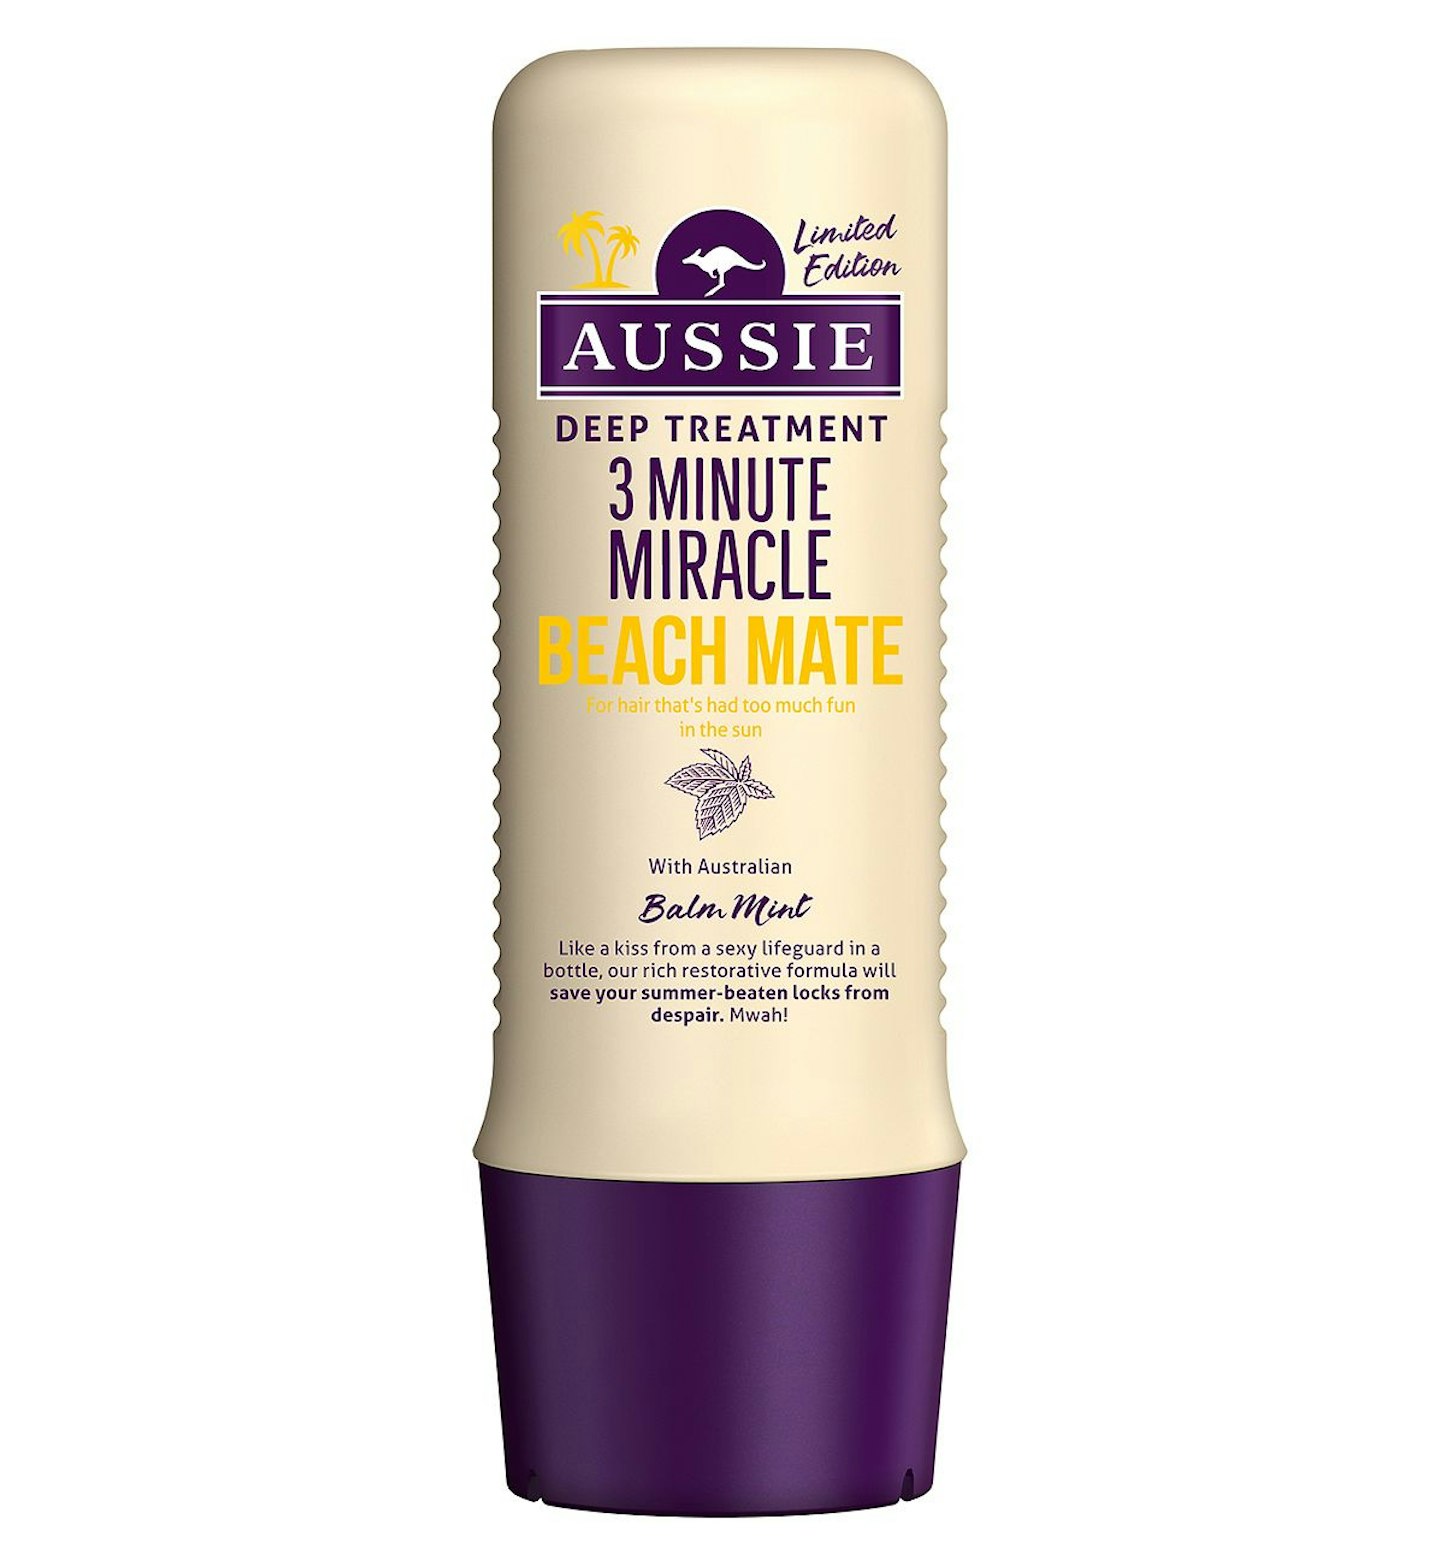 Aussie 3 Minute Miracle Beach Mate Deep Treatment Conditioner, £4.99 from Boots